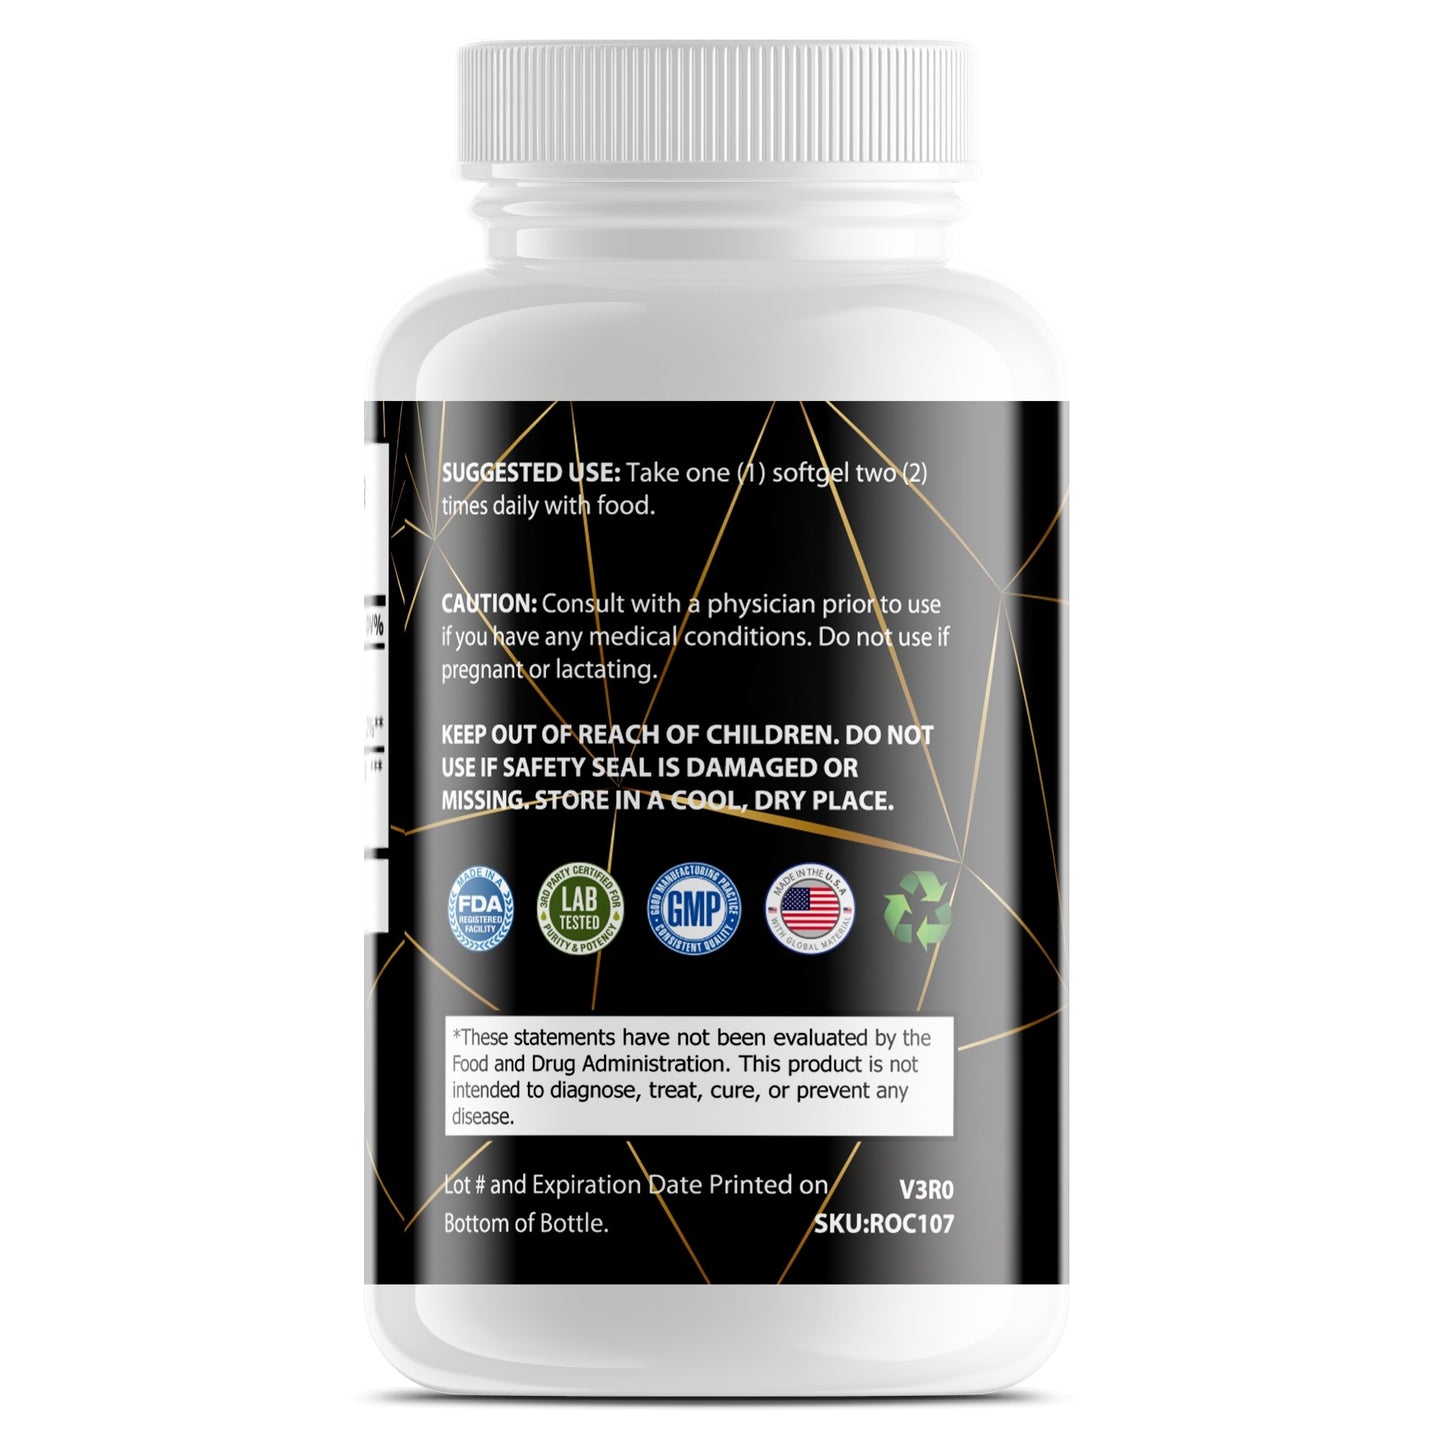 CLA Softgels - Conjugated Linoleic Acid - 1000mg - For Fathers Fitness